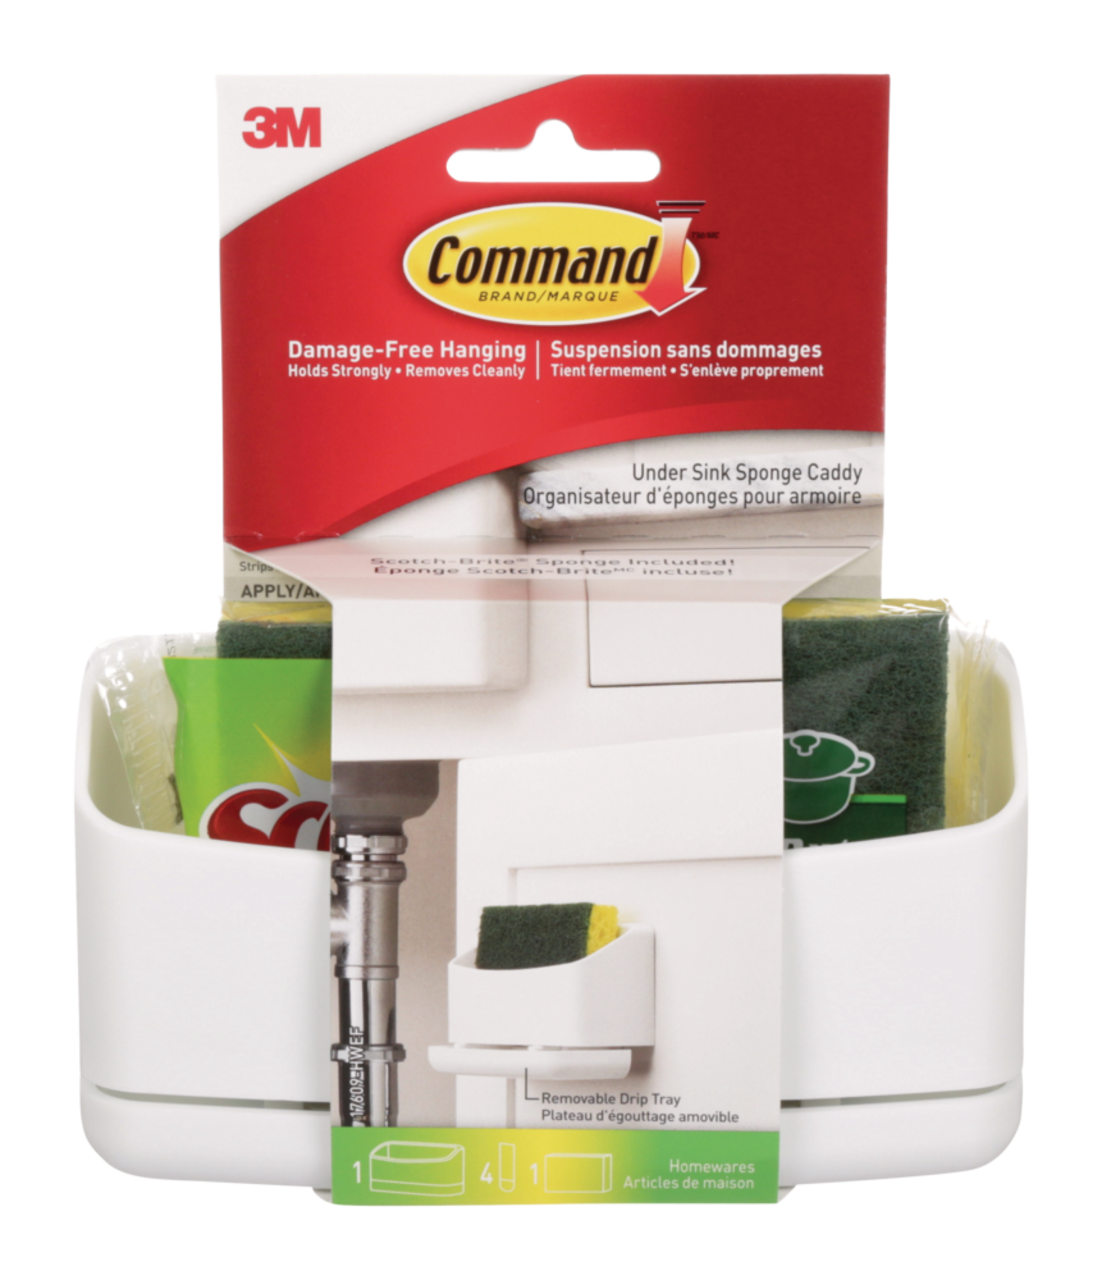 https://media-www.canadiantire.ca/product/living/cleaning/household-cleaning-tools/1424837/3m-sponge-caddy--f1a06d52-ee86-490c-aab2-462121a081b3.png?imdensity=1&imwidth=640&impolicy=mZoom